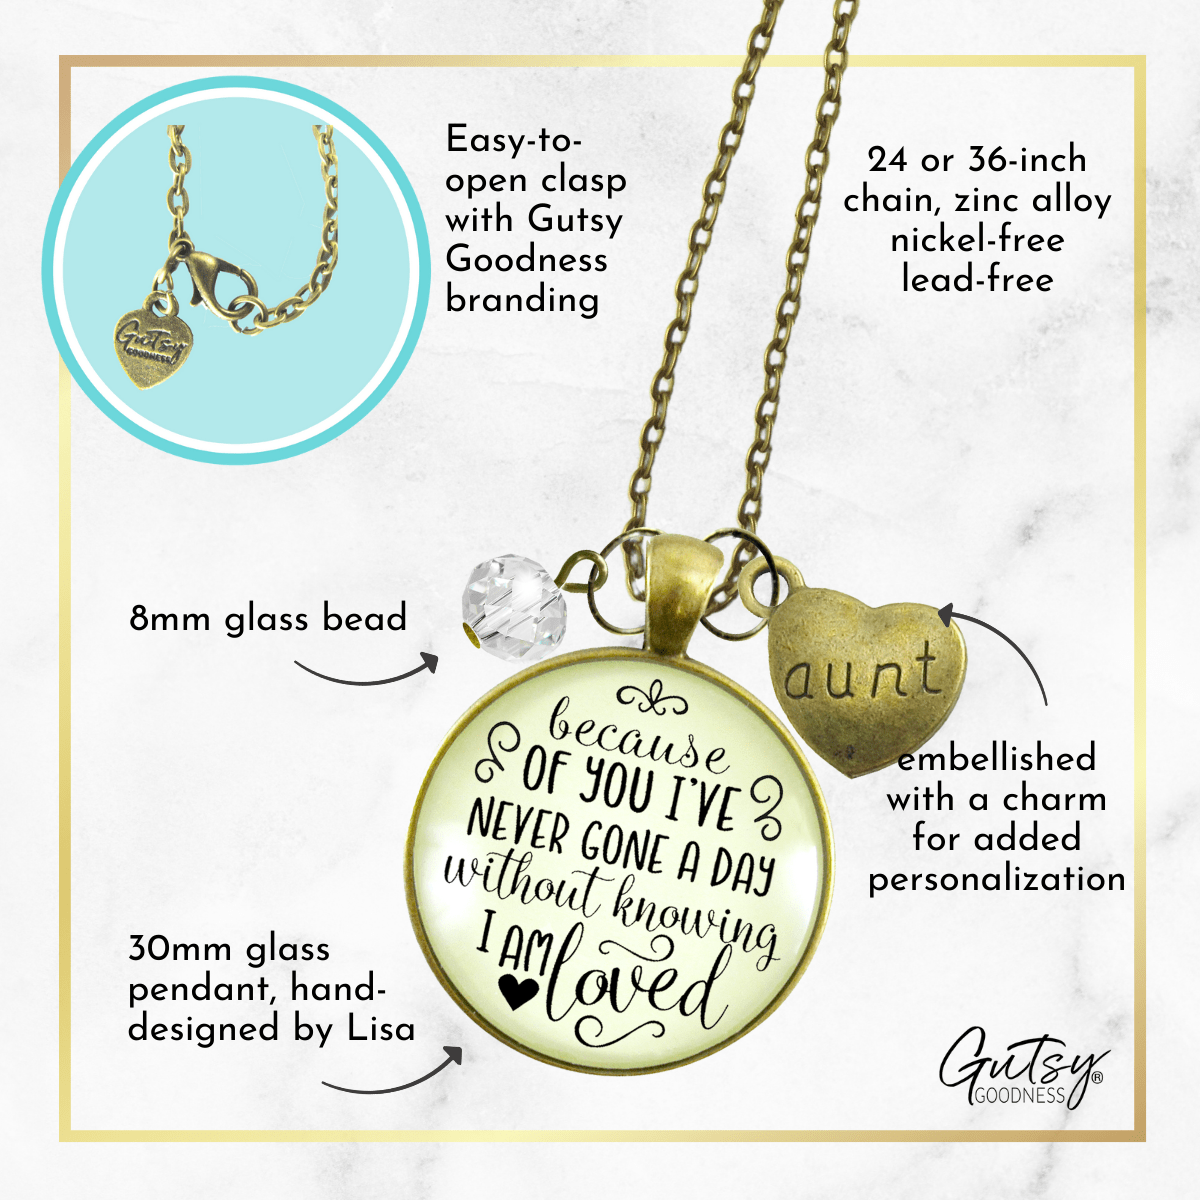 Gutsy Goodness Aunt Necklace Because of Your Love Meaningful Gift Family Jewelry - Gutsy Goodness Handmade Jewelry;Aunt Necklace Because Of Your Love Meaningful Gift Family Jewelry - Gutsy Goodness Handmade Jewelry Gifts